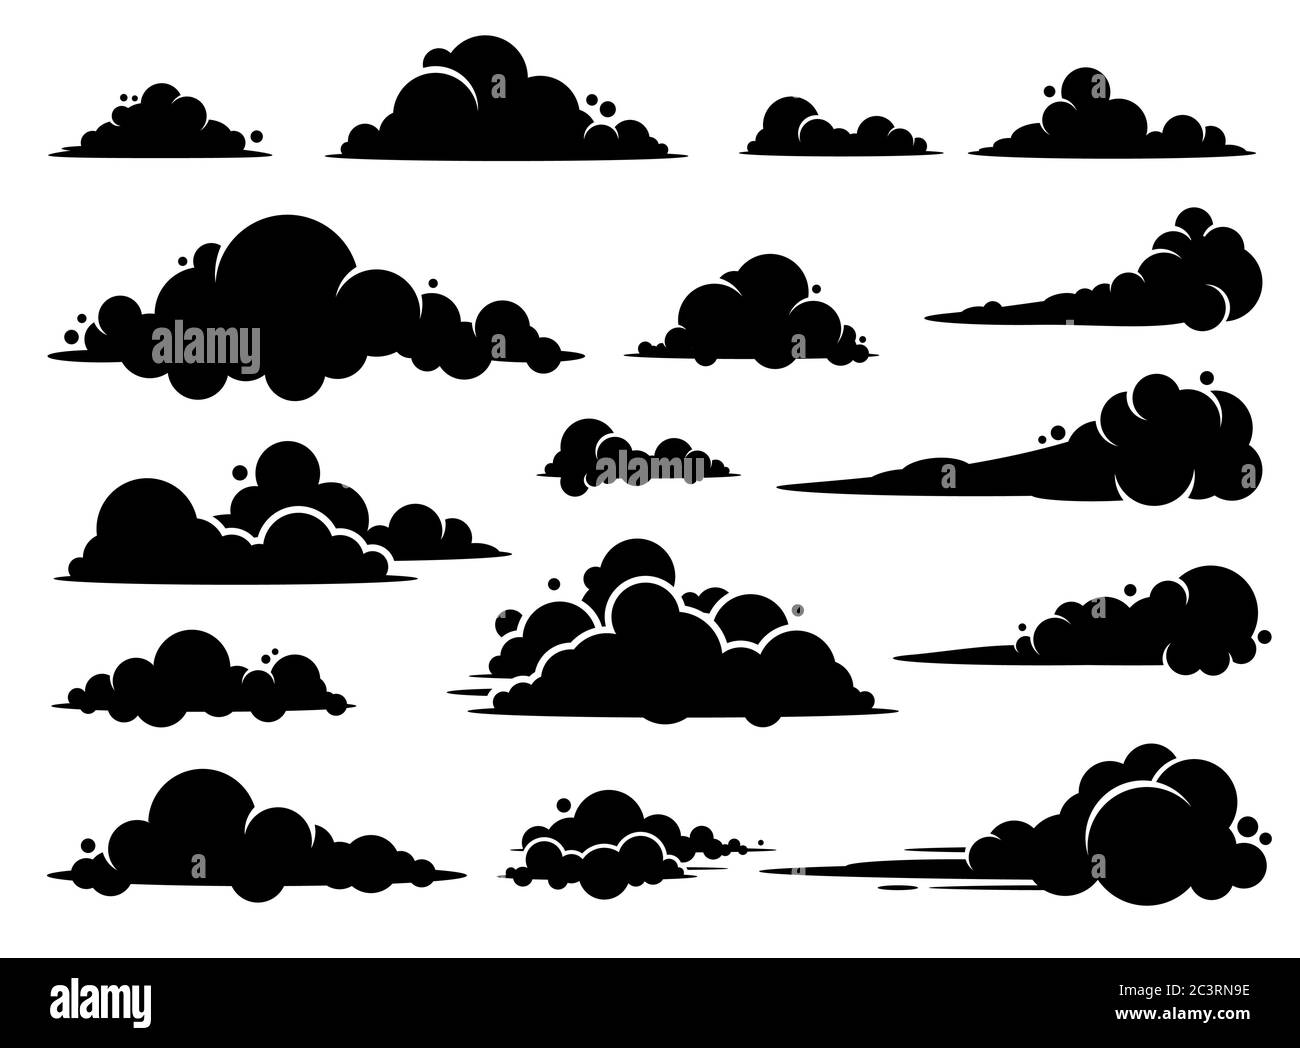 Cloud vector graphic design. A set of clouds illustration in the sky in black silhouette. Stock Vector